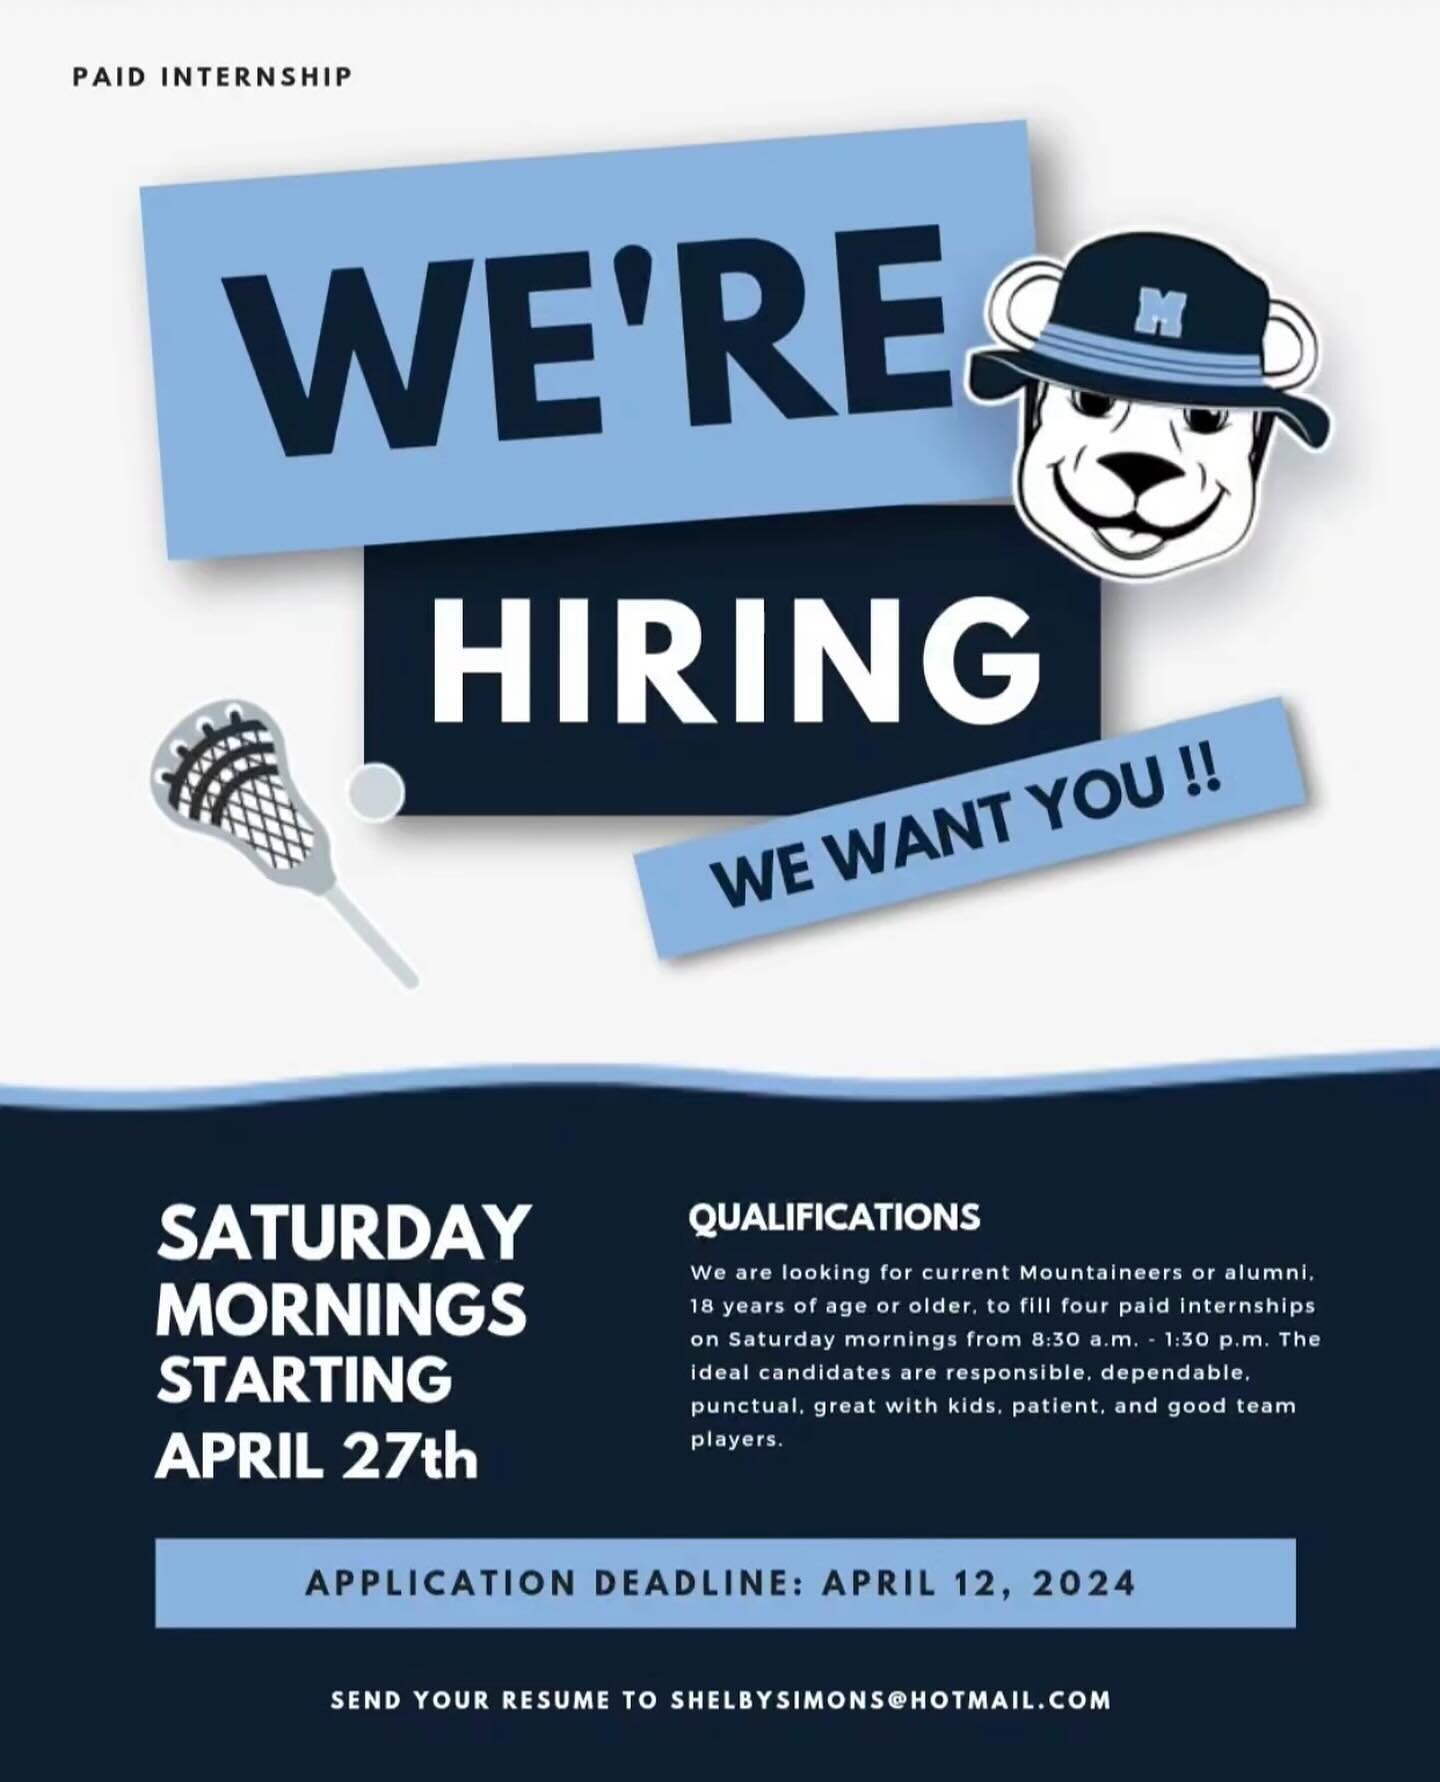 We are 3 weeks away from The Most Fun Lacrosse Club&trade;️ and we are looking for volunteers and coaches! 

The Saturday morning programs begins on Saturday April 27 and ends on June 22. We are looking for volunteers and coaches available from 8:30a